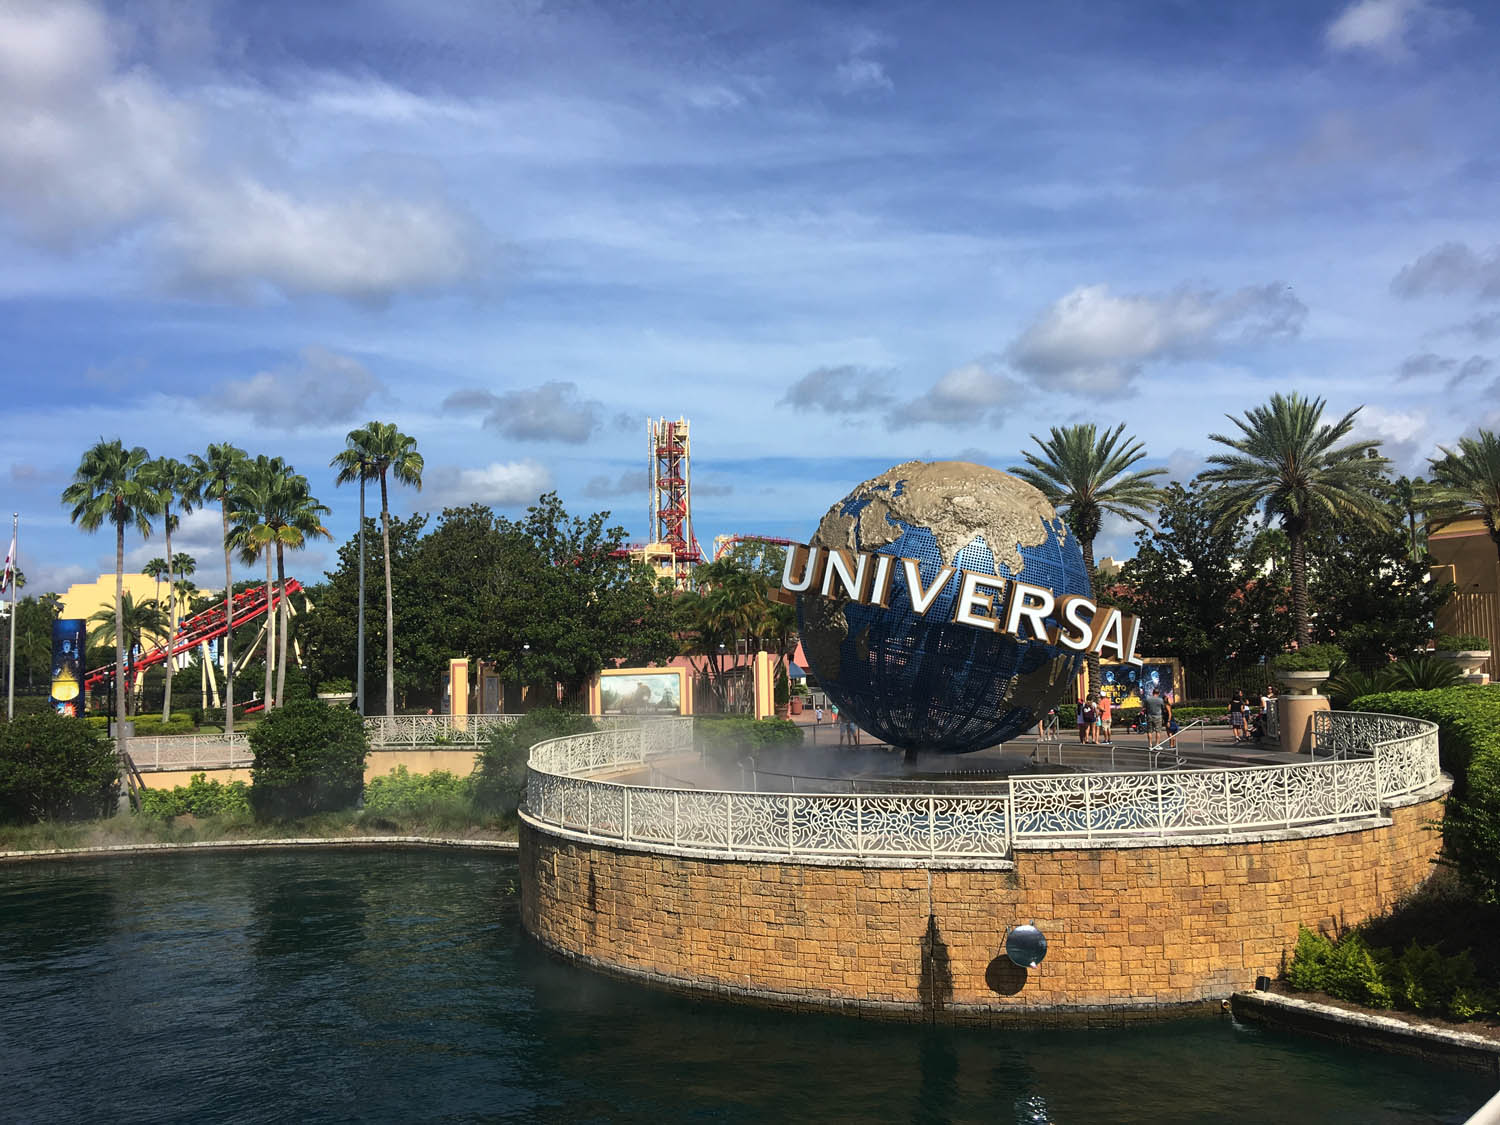 Yes of course, Universal Florida!